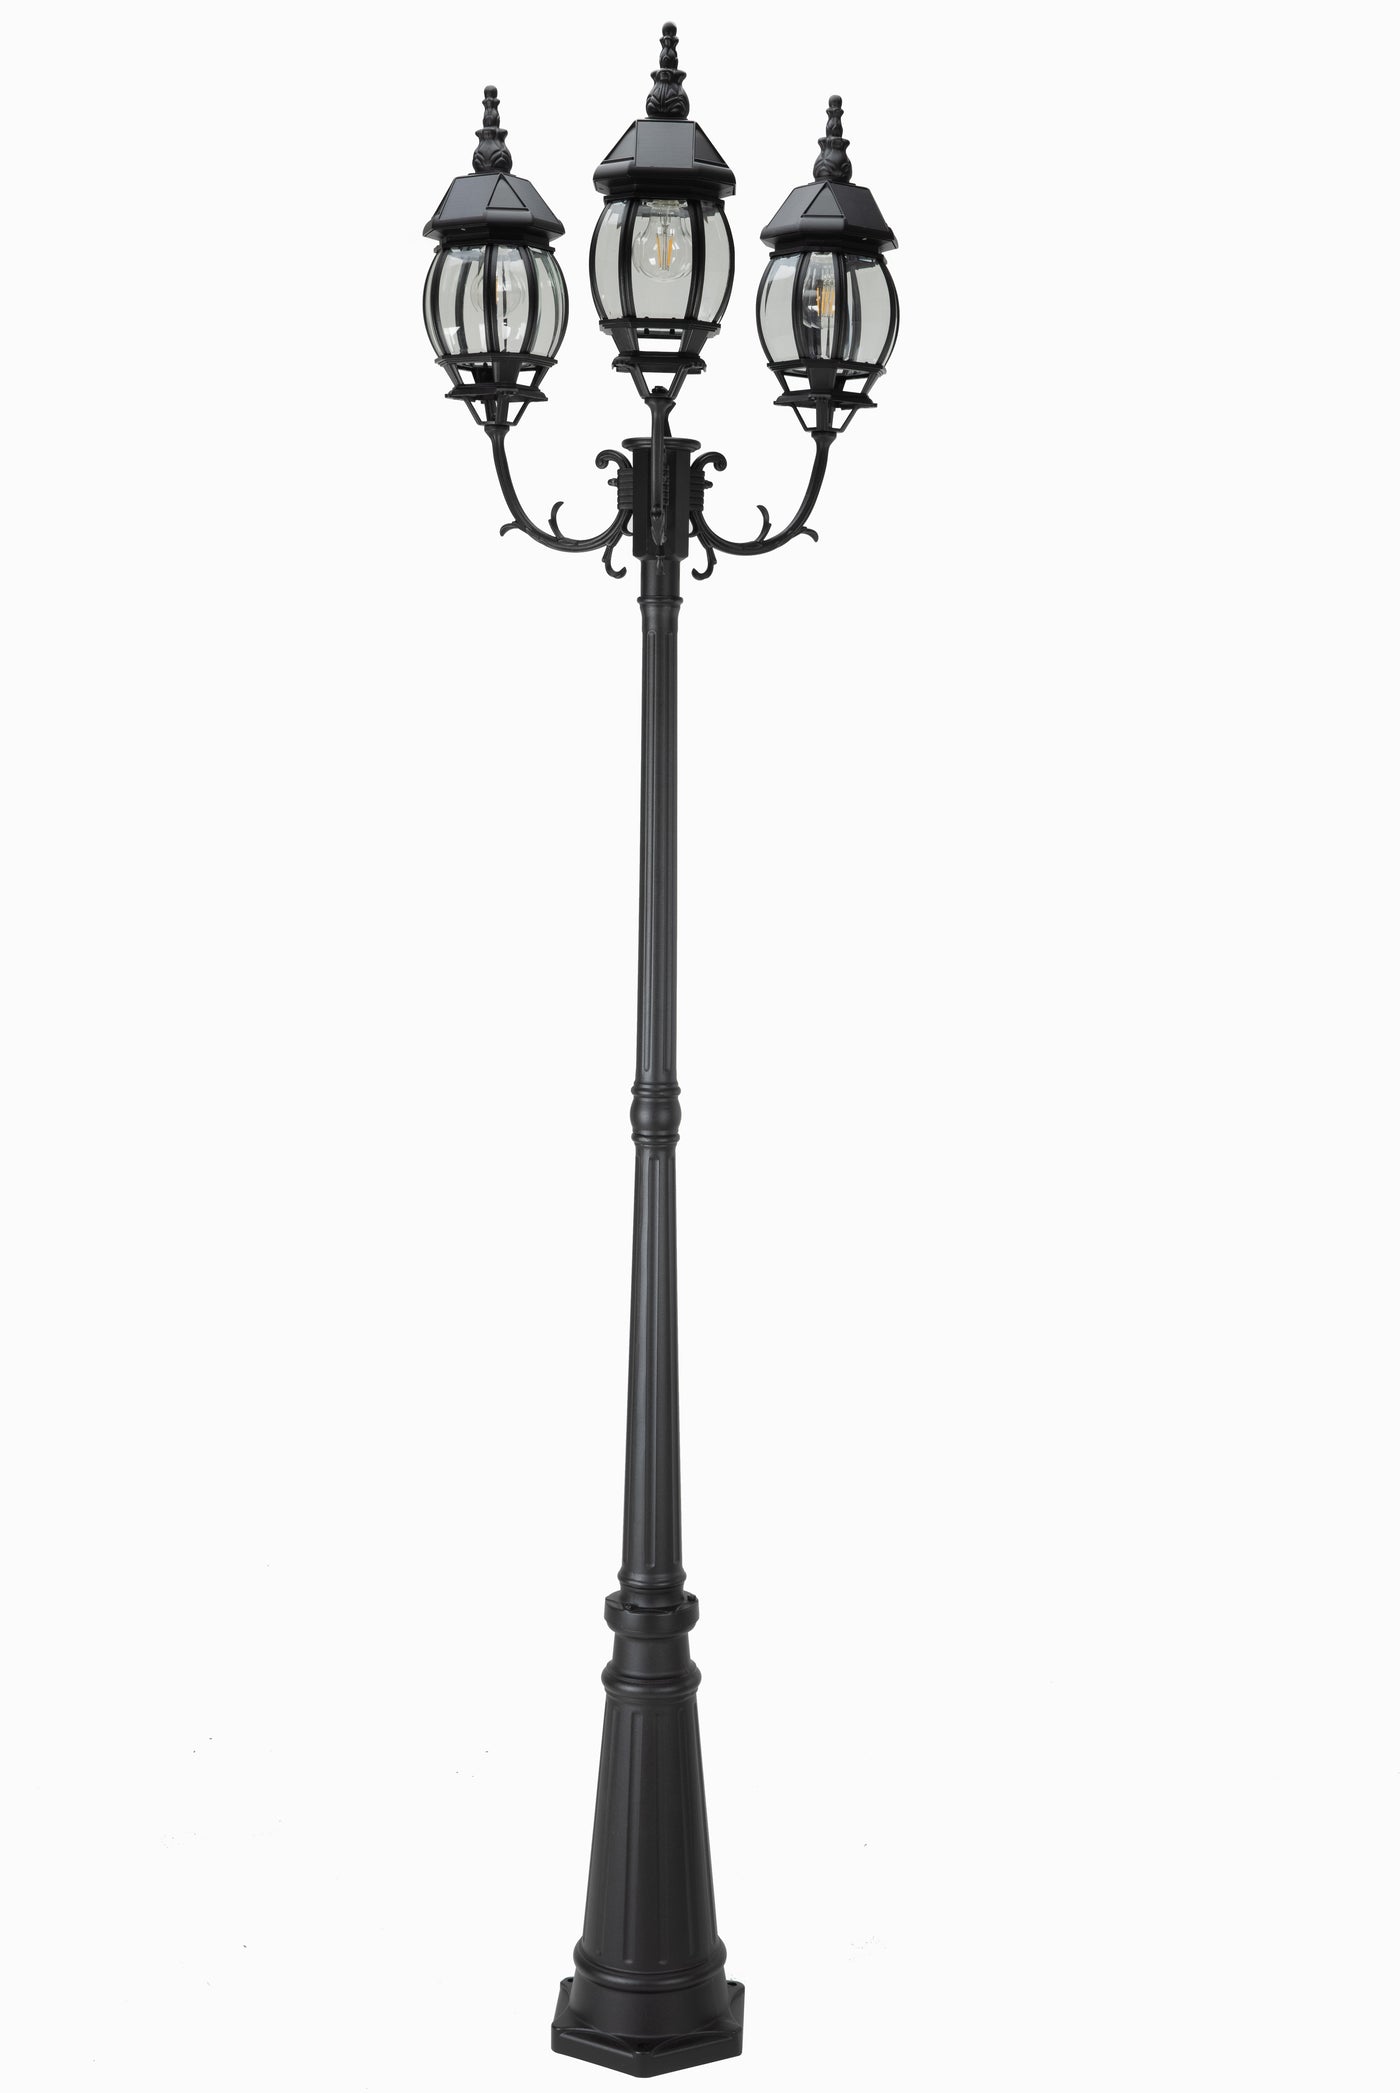 LUTEC - Outdoor Solar Post Light with Triple-Head, Dusk to Dawn , Aluminium Vintage Street Lights for Lawn Pathway Garden Black Light Pole with Clear Glass Panels(Bulbs Included)